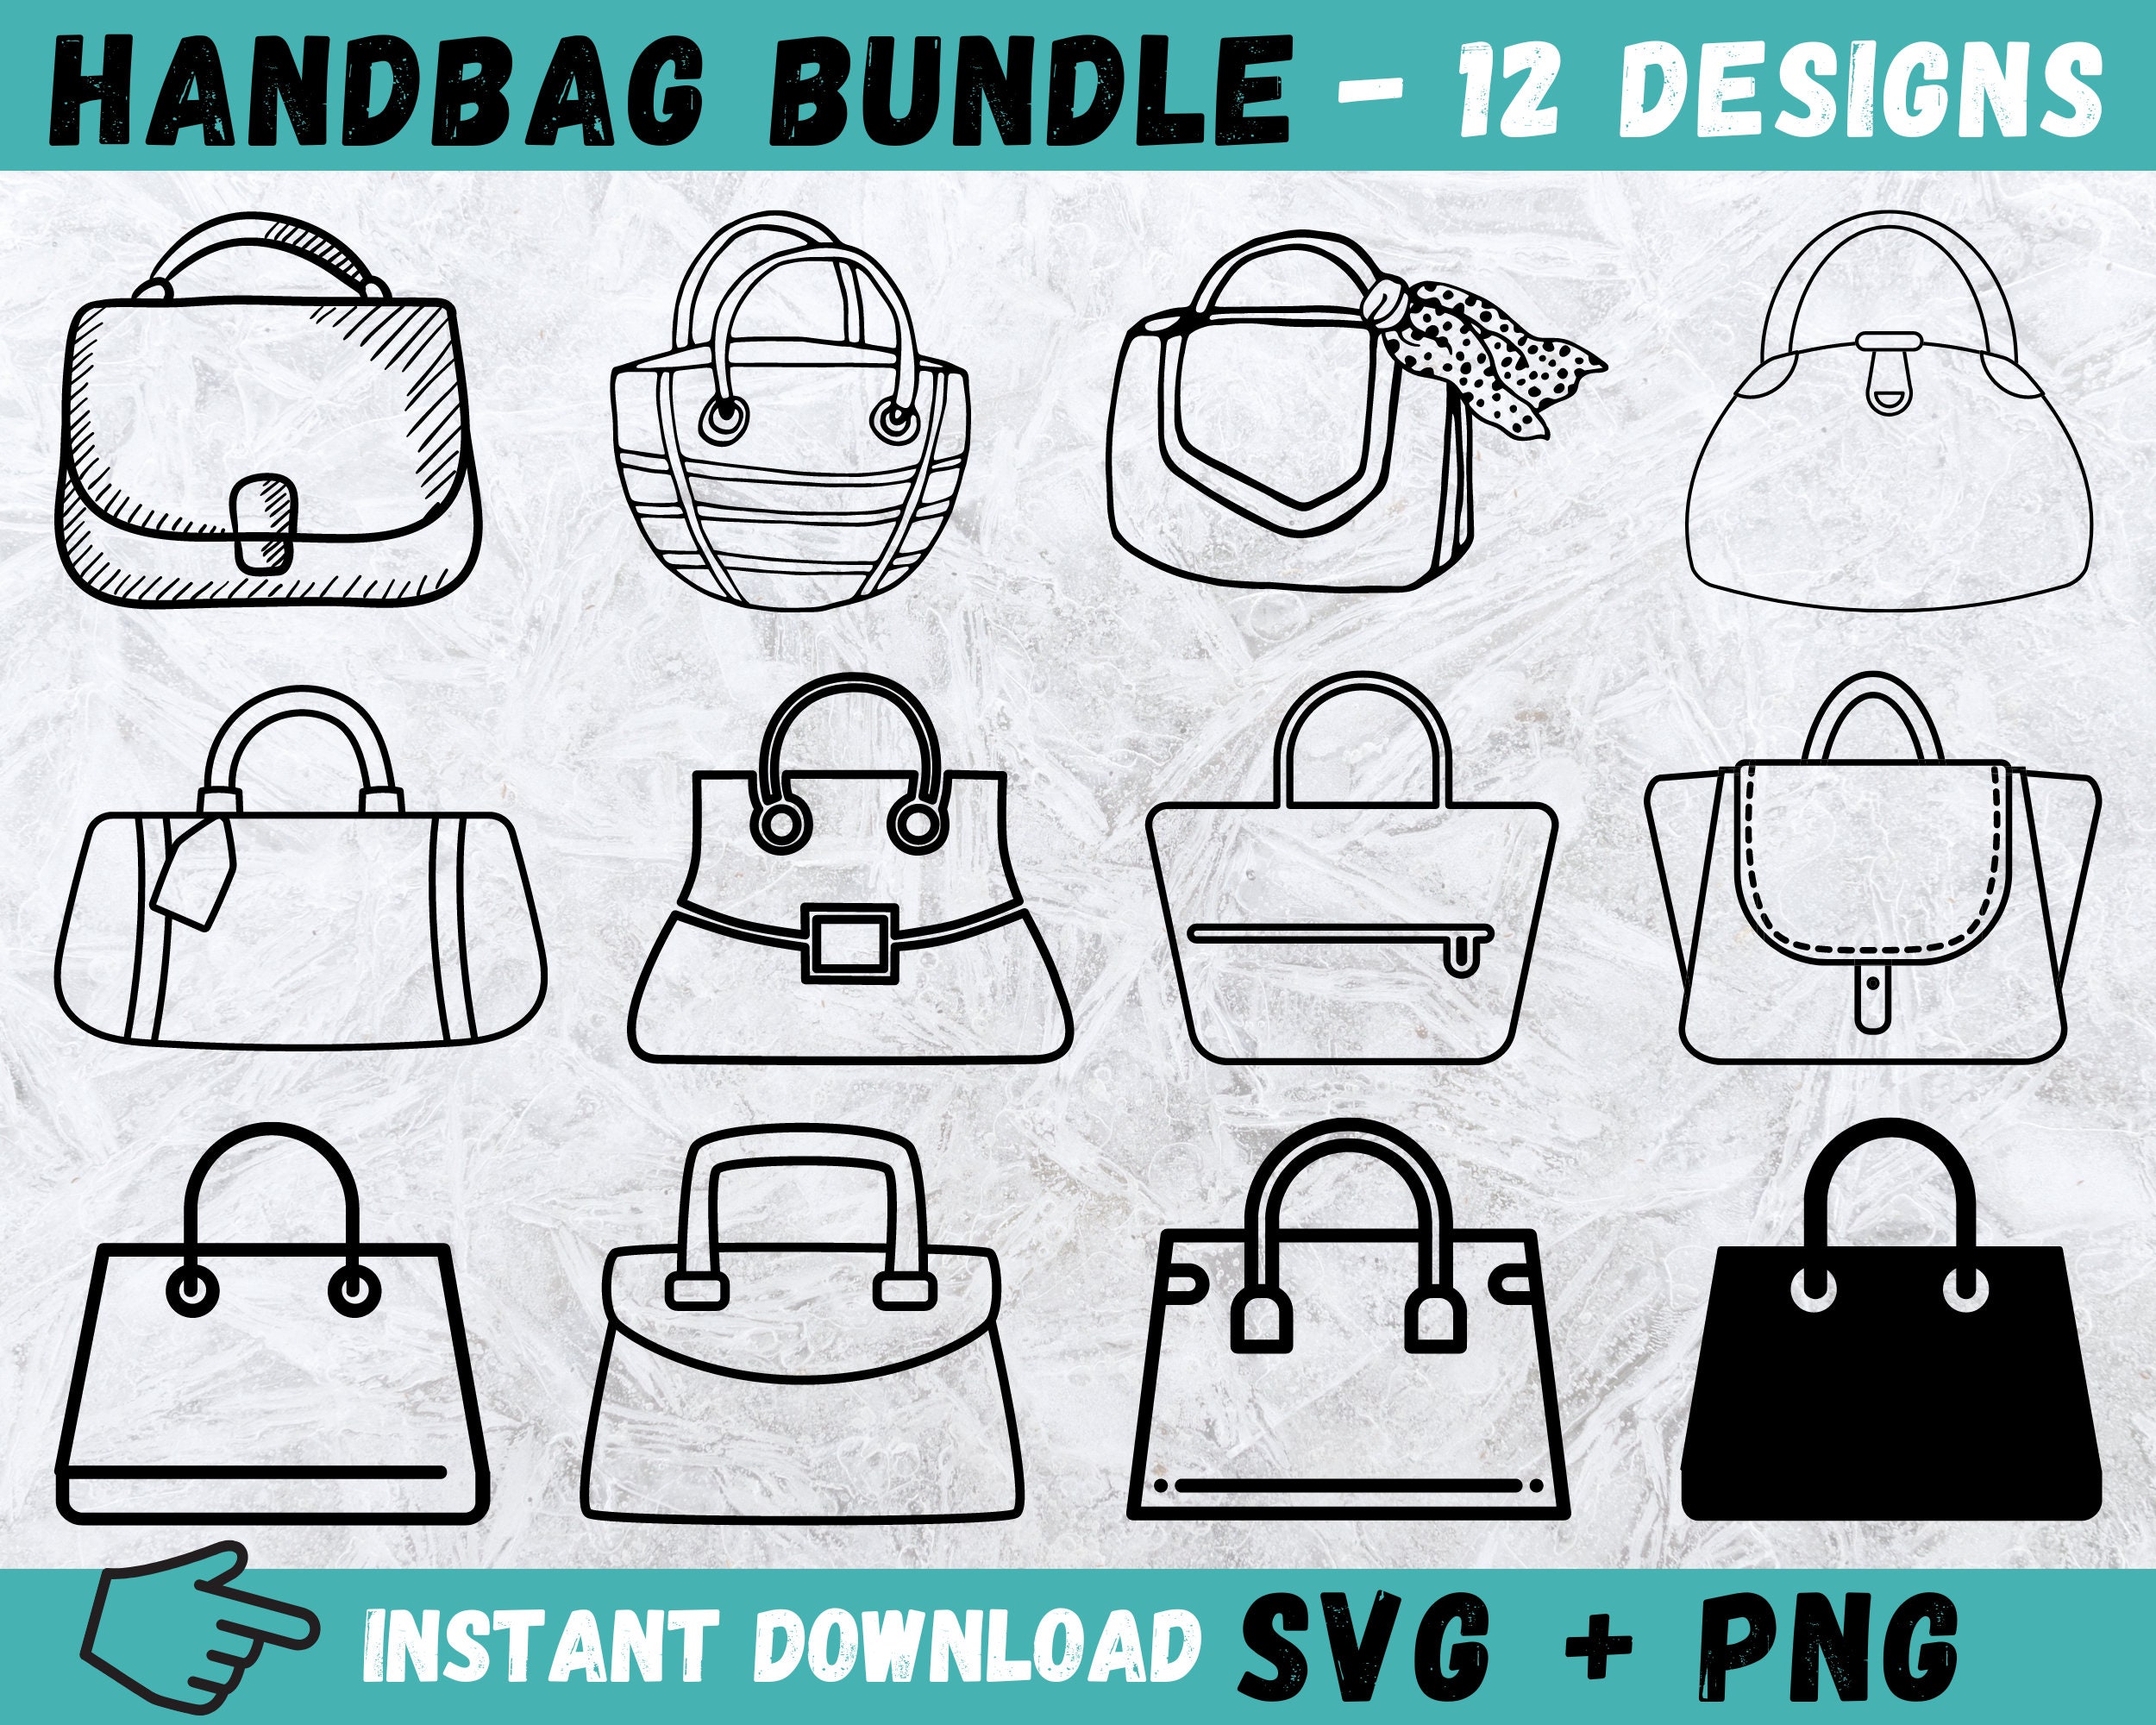 Collage Stylish Womans Handbags Accessories On Stock Photo